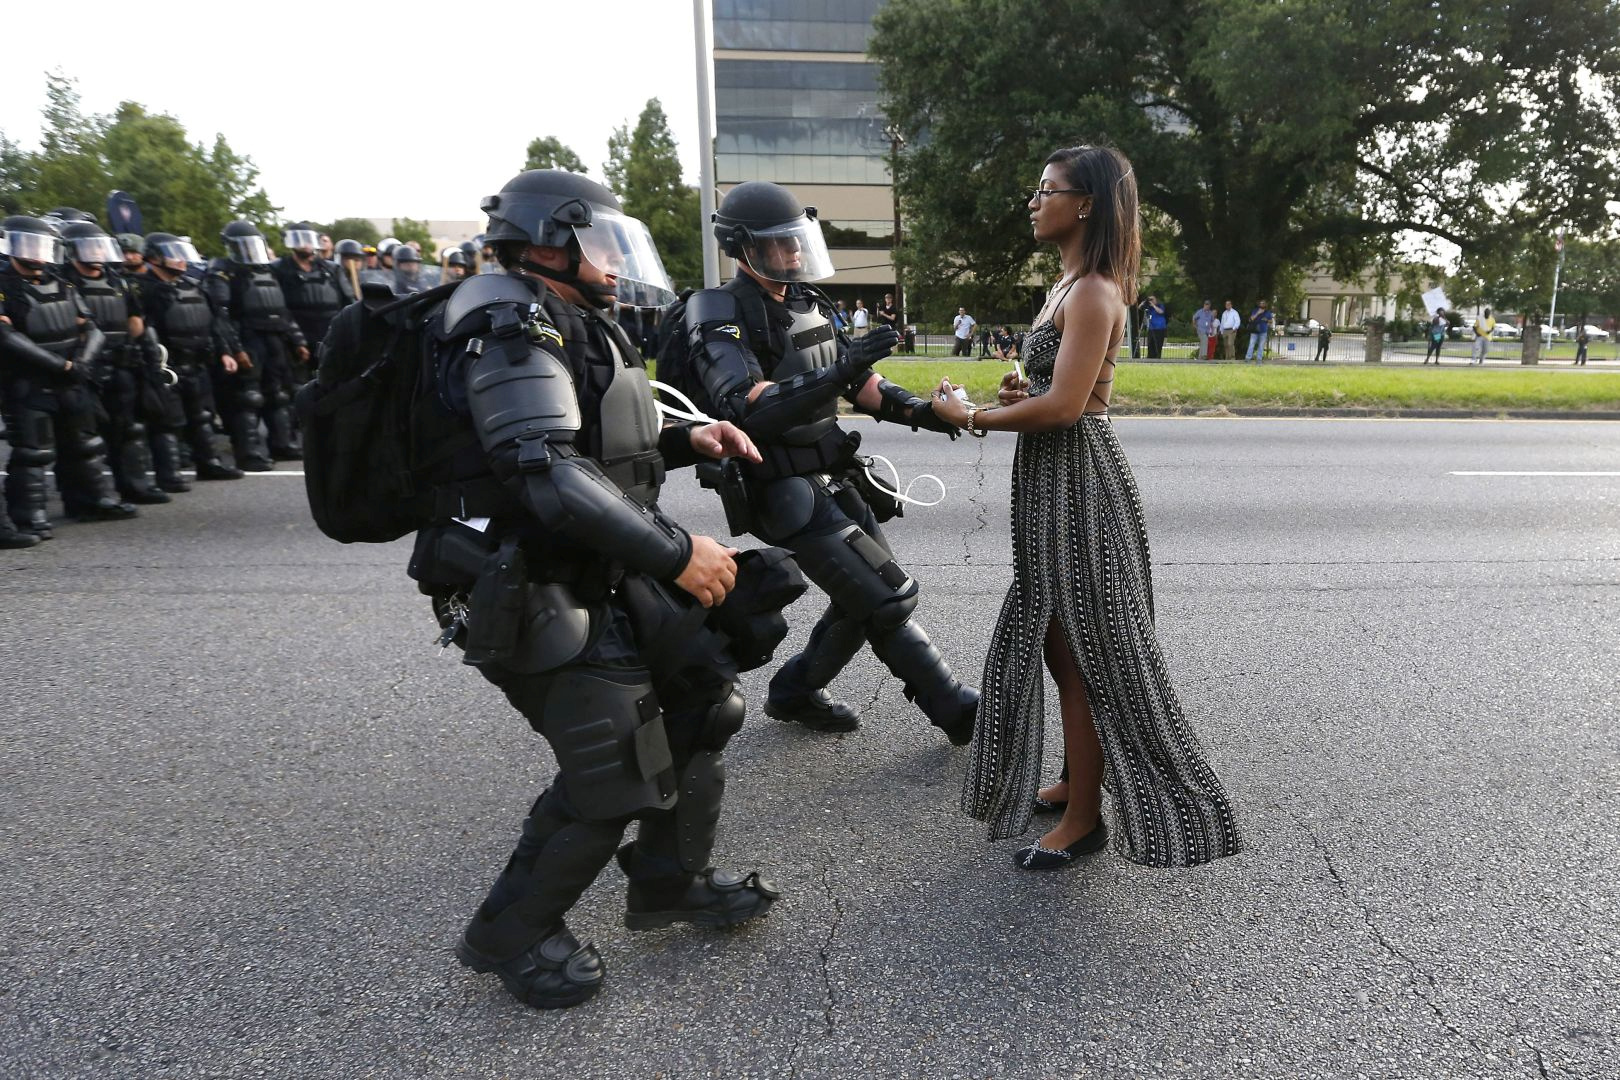 Lone activist Ieshia Evans stands her ground while offering her hands for arrest as she is charged by riot police during a protest against police brutality outside the Baton Rouge Police Department in Louisiana